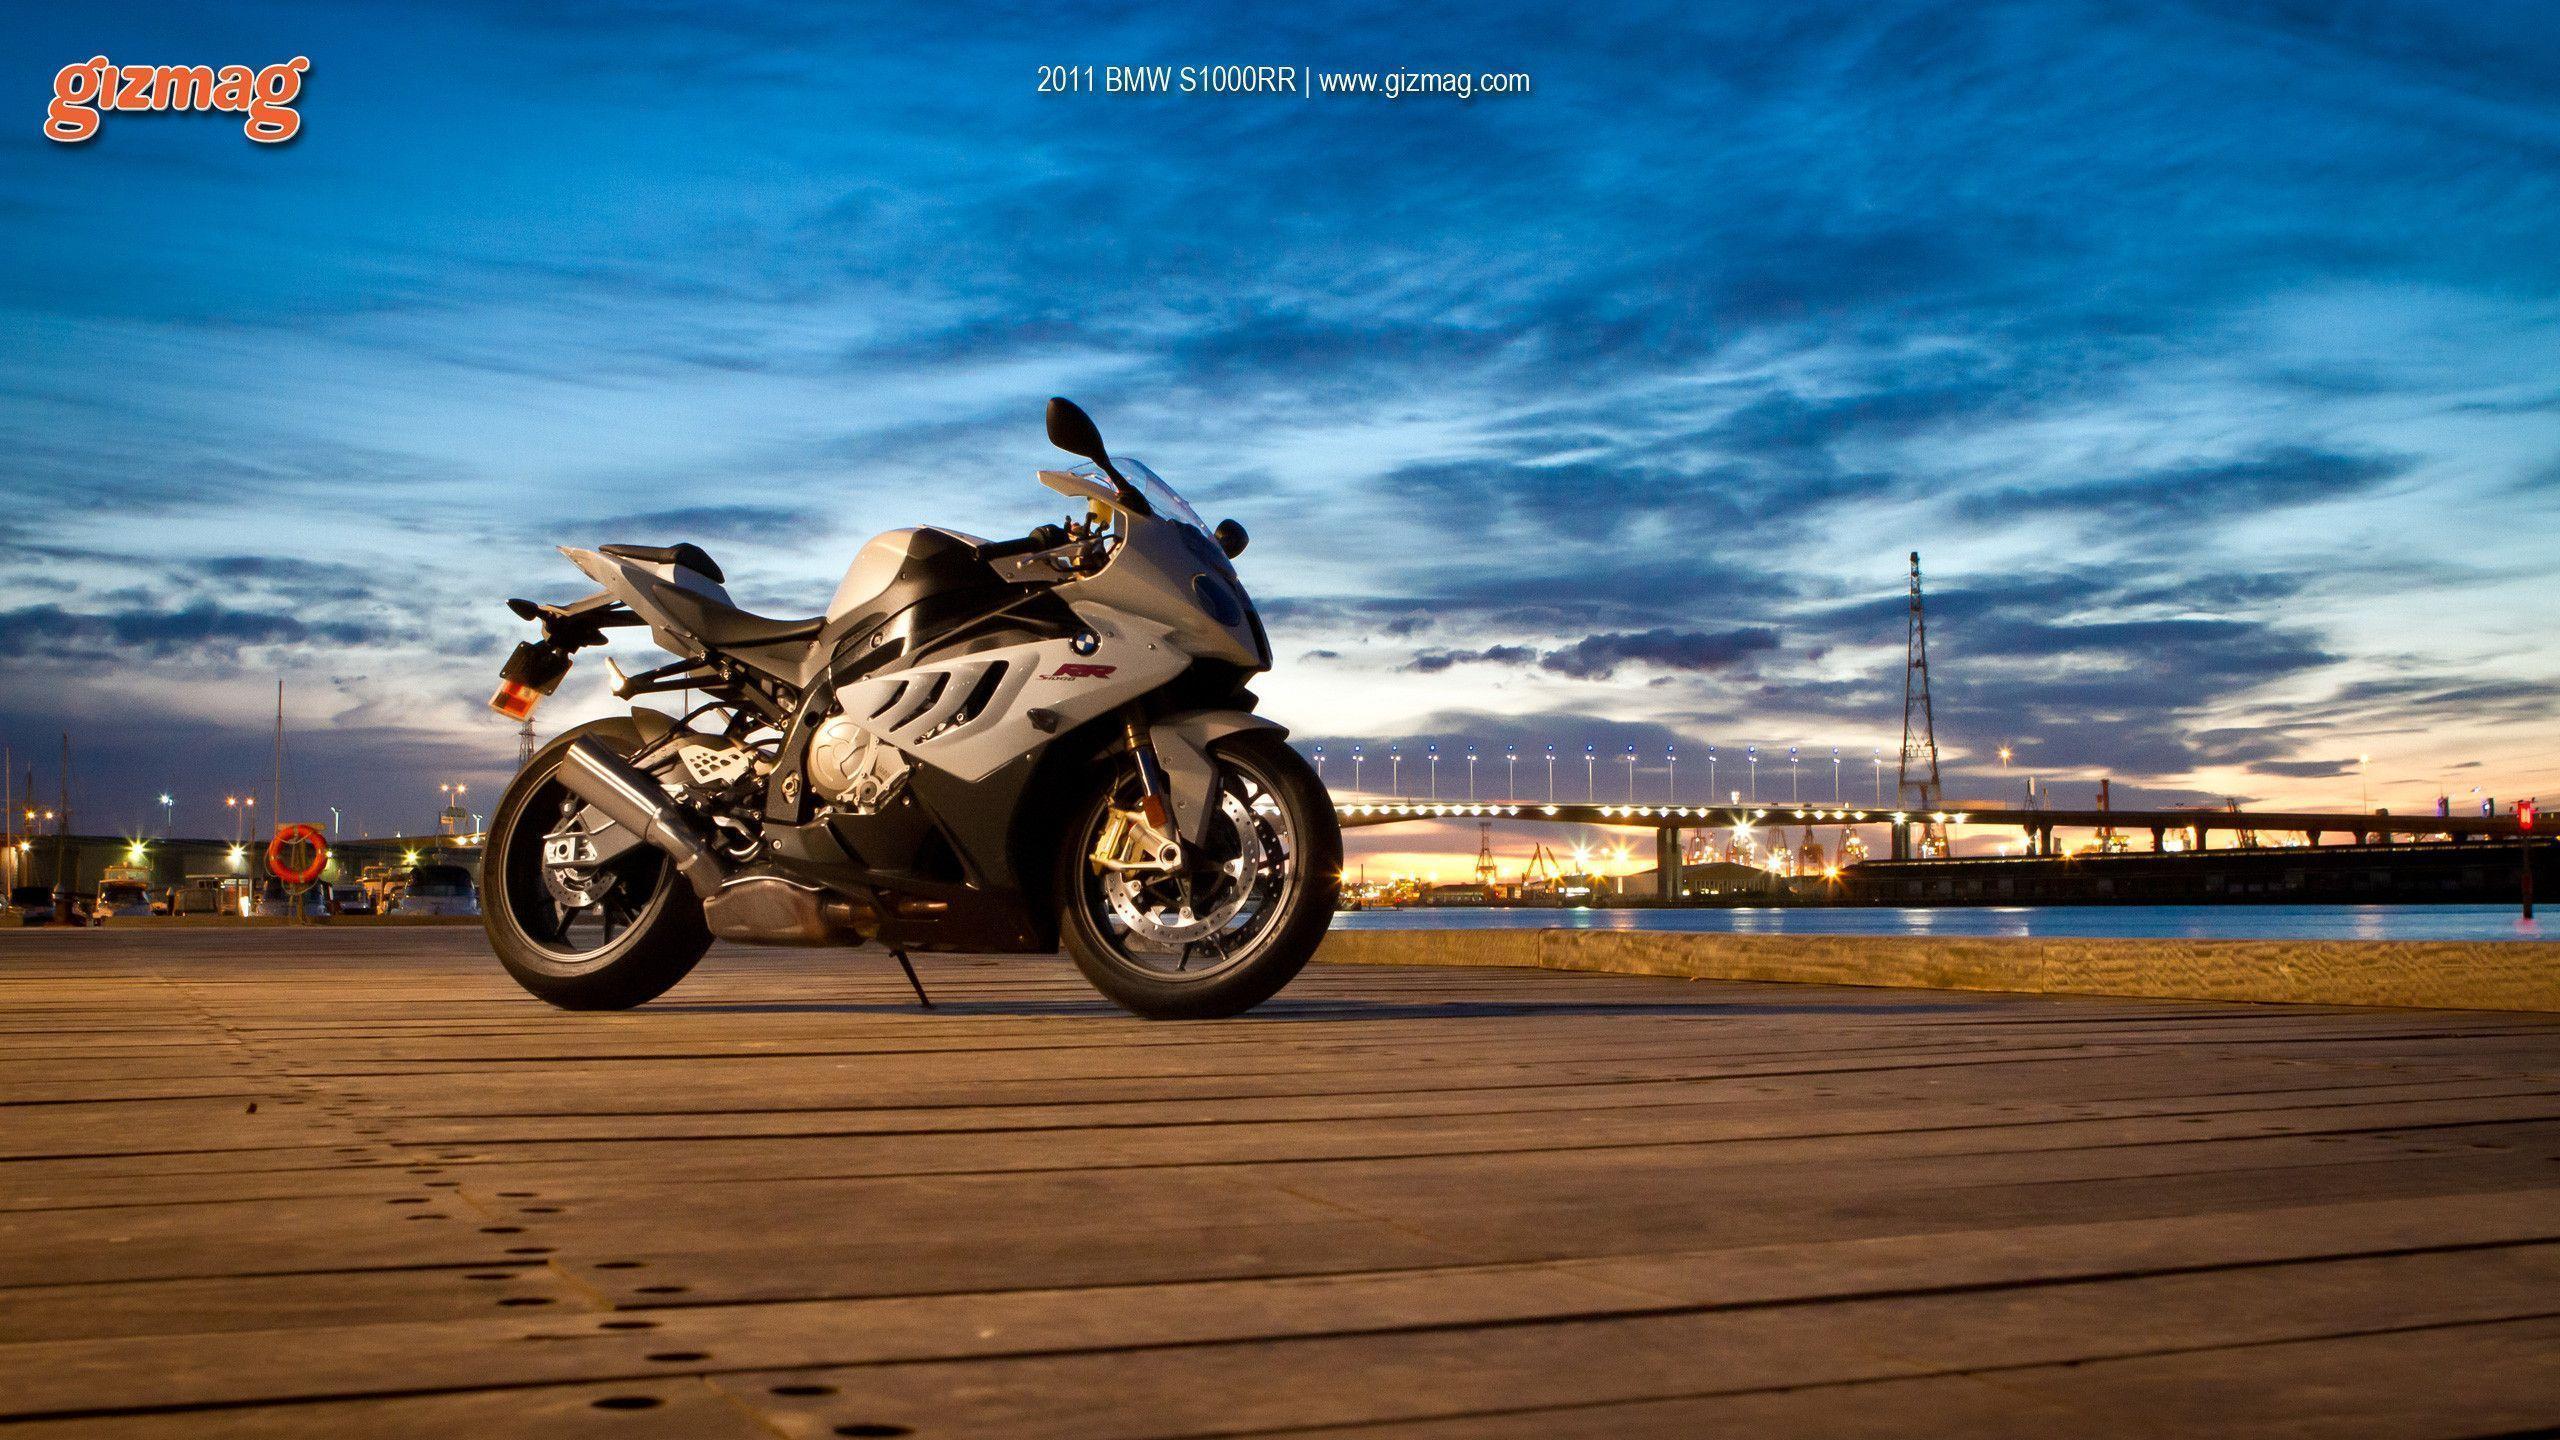 image For > Bmw S1000rr Wallpaper